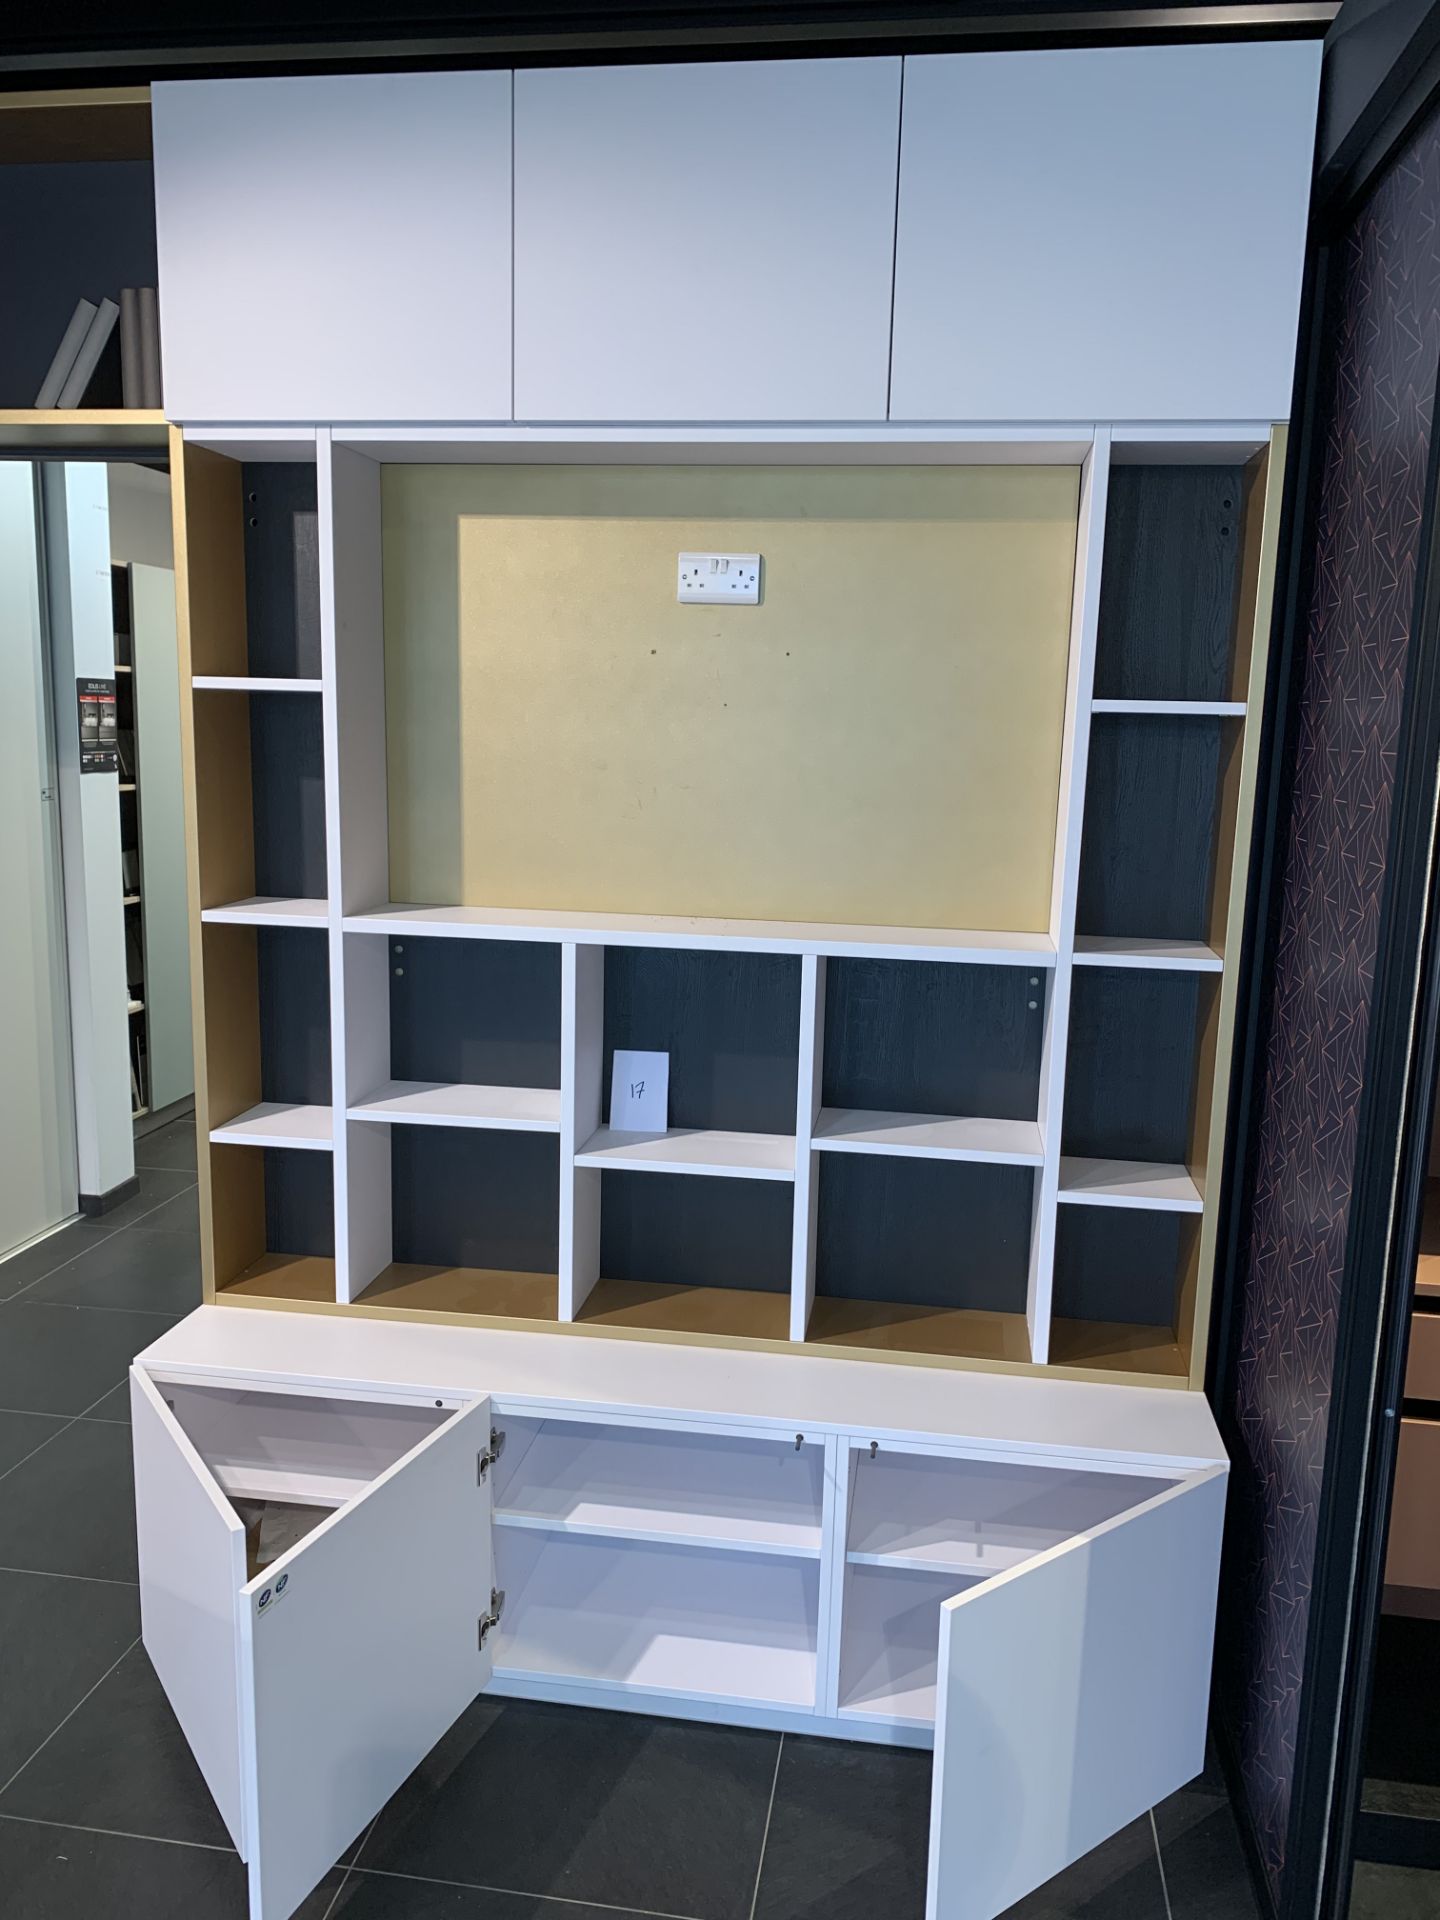 Display unit and cabinets - Image 2 of 2